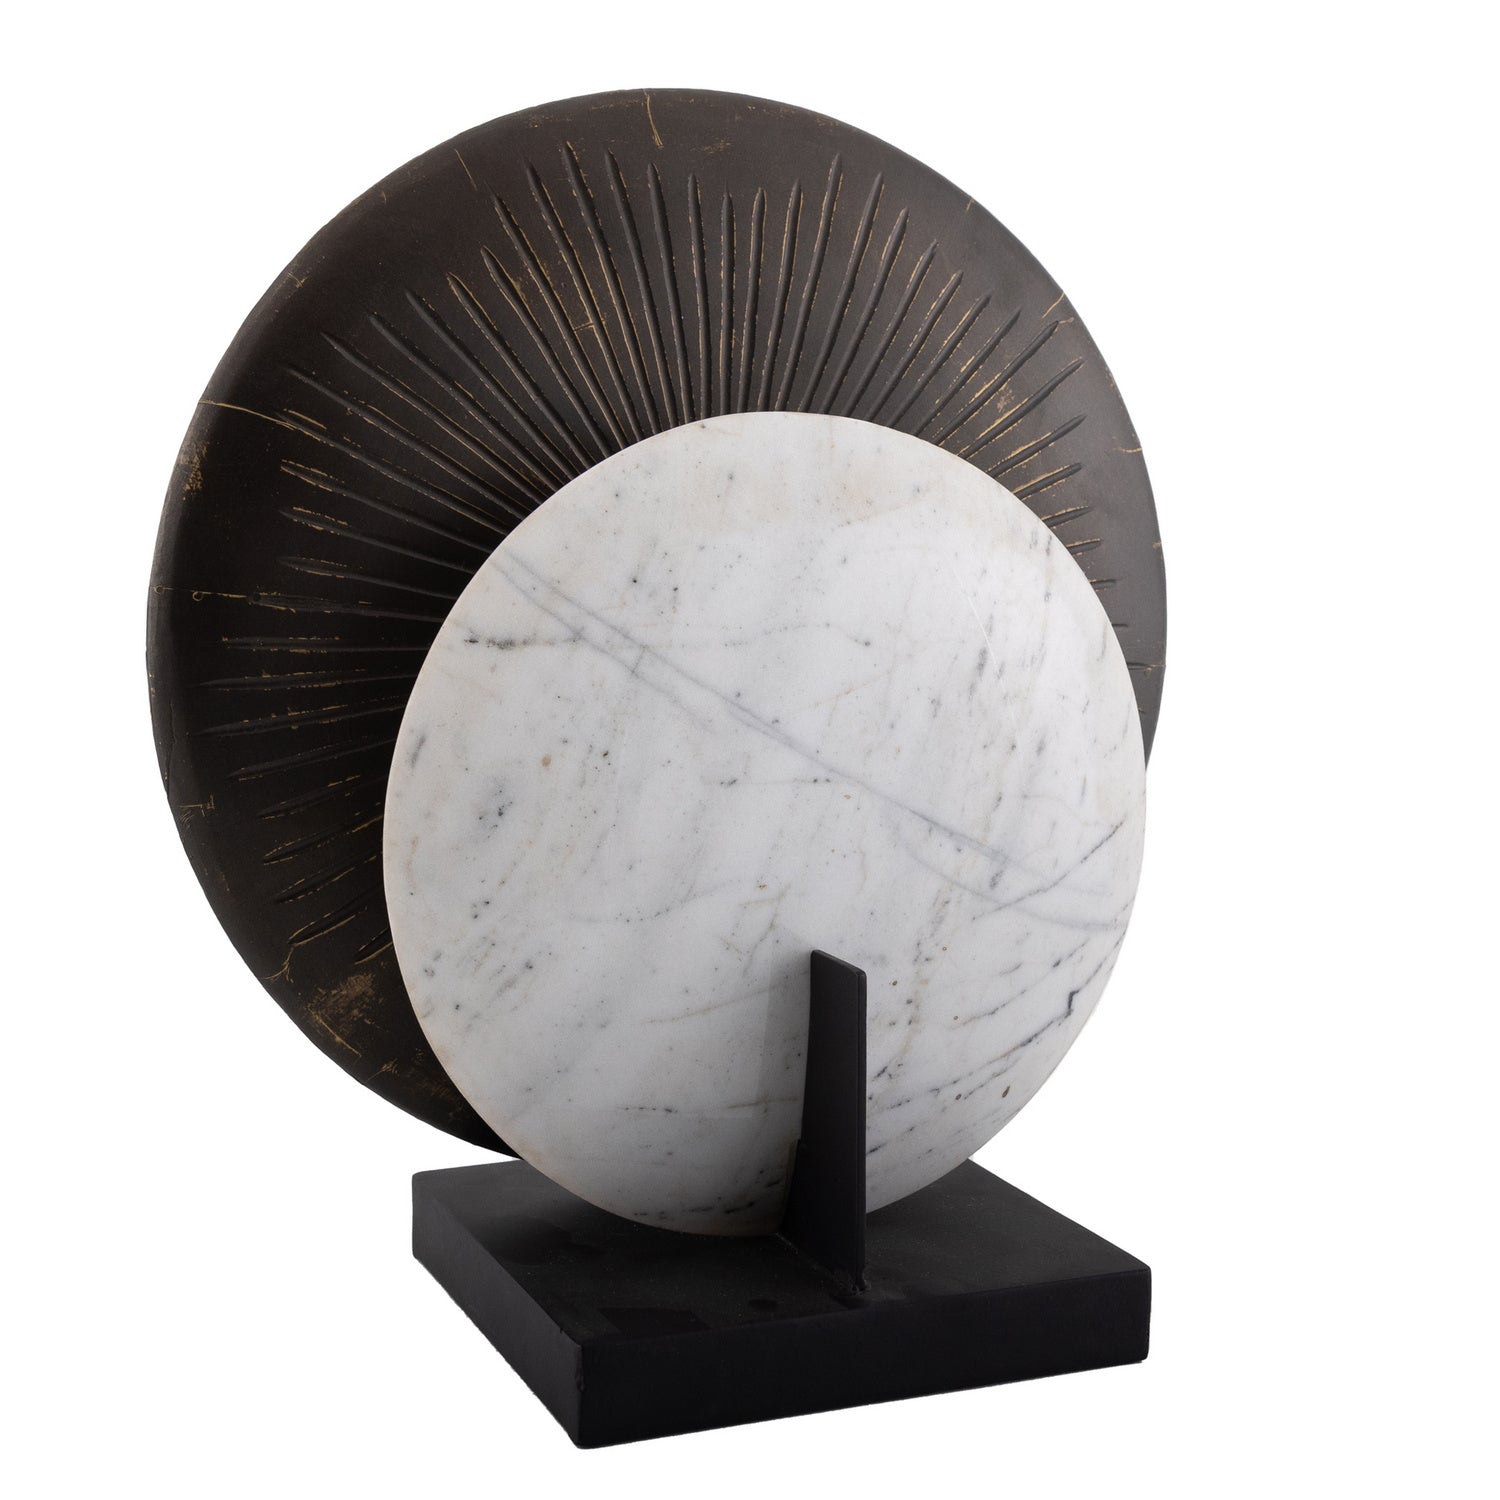 Sculpture from the Renesmee collection in Bronze finish